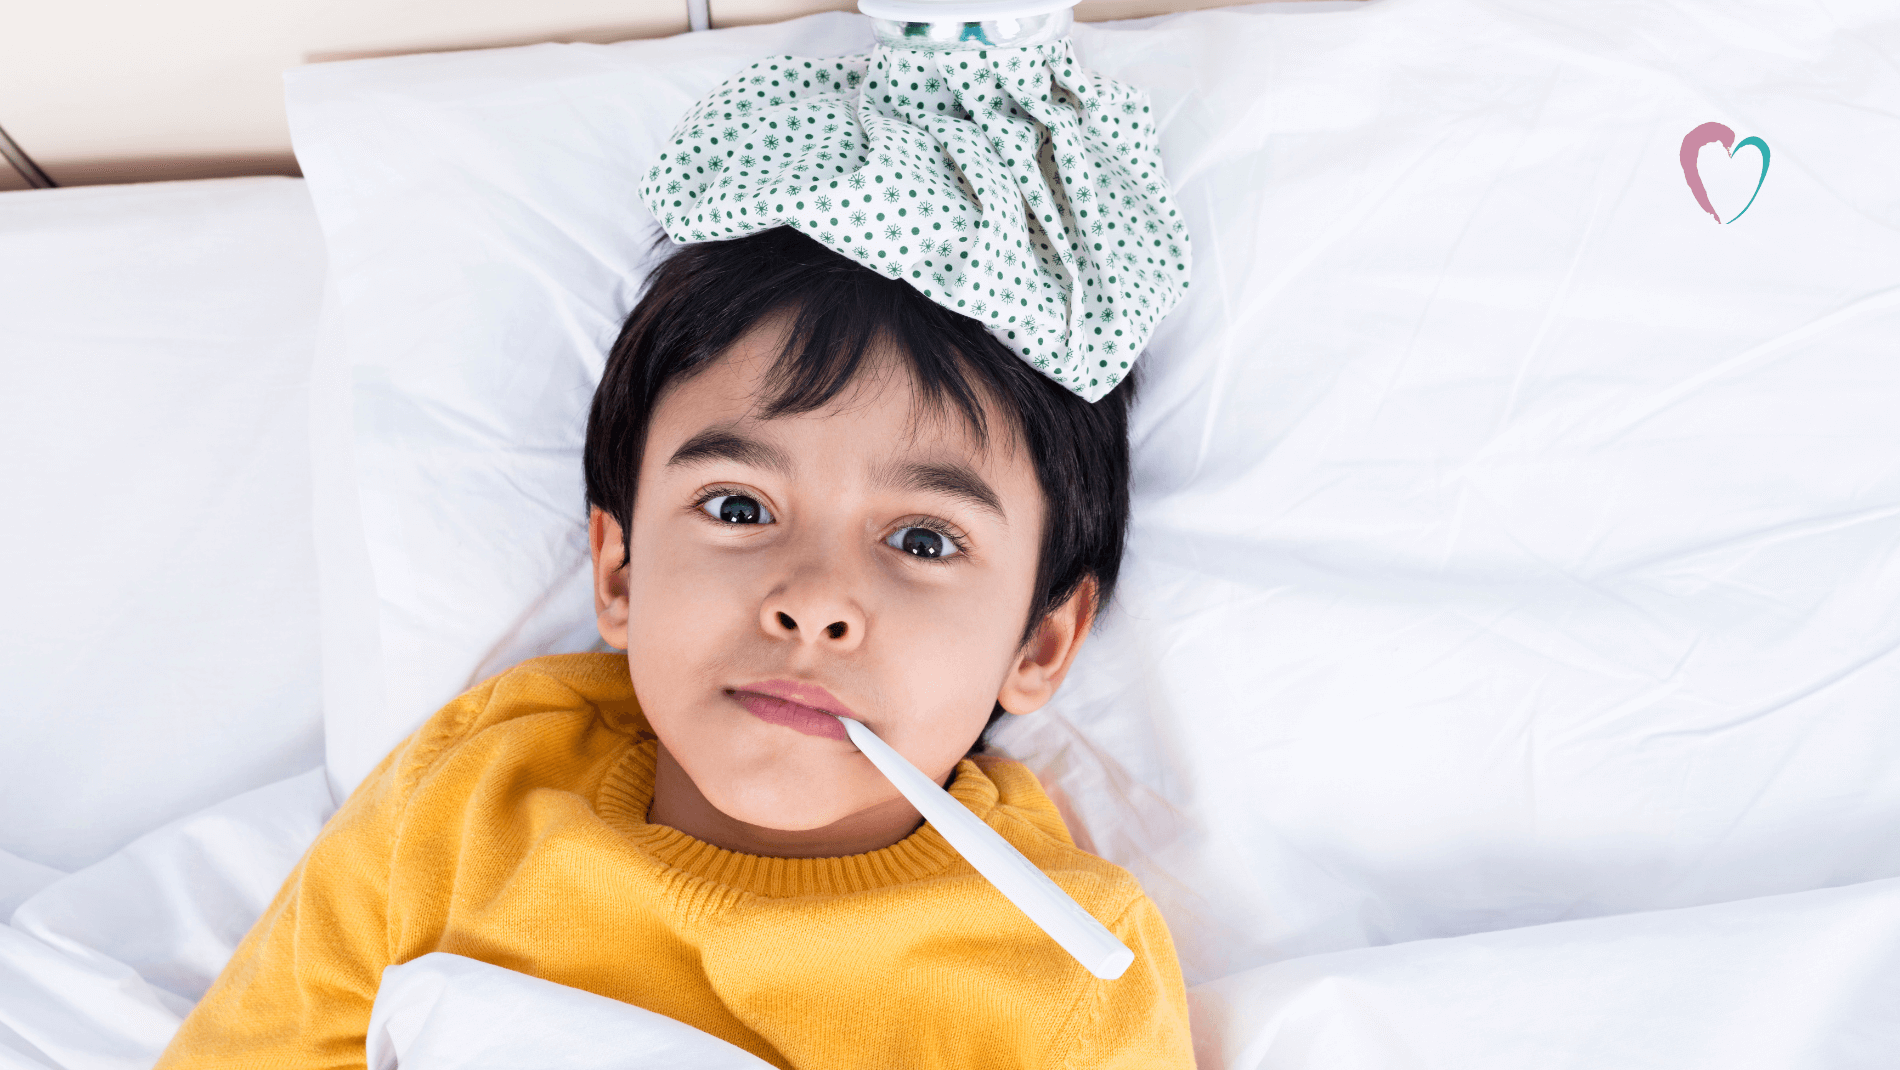 Scarlet fever: Symptoms to look out for and how to treat